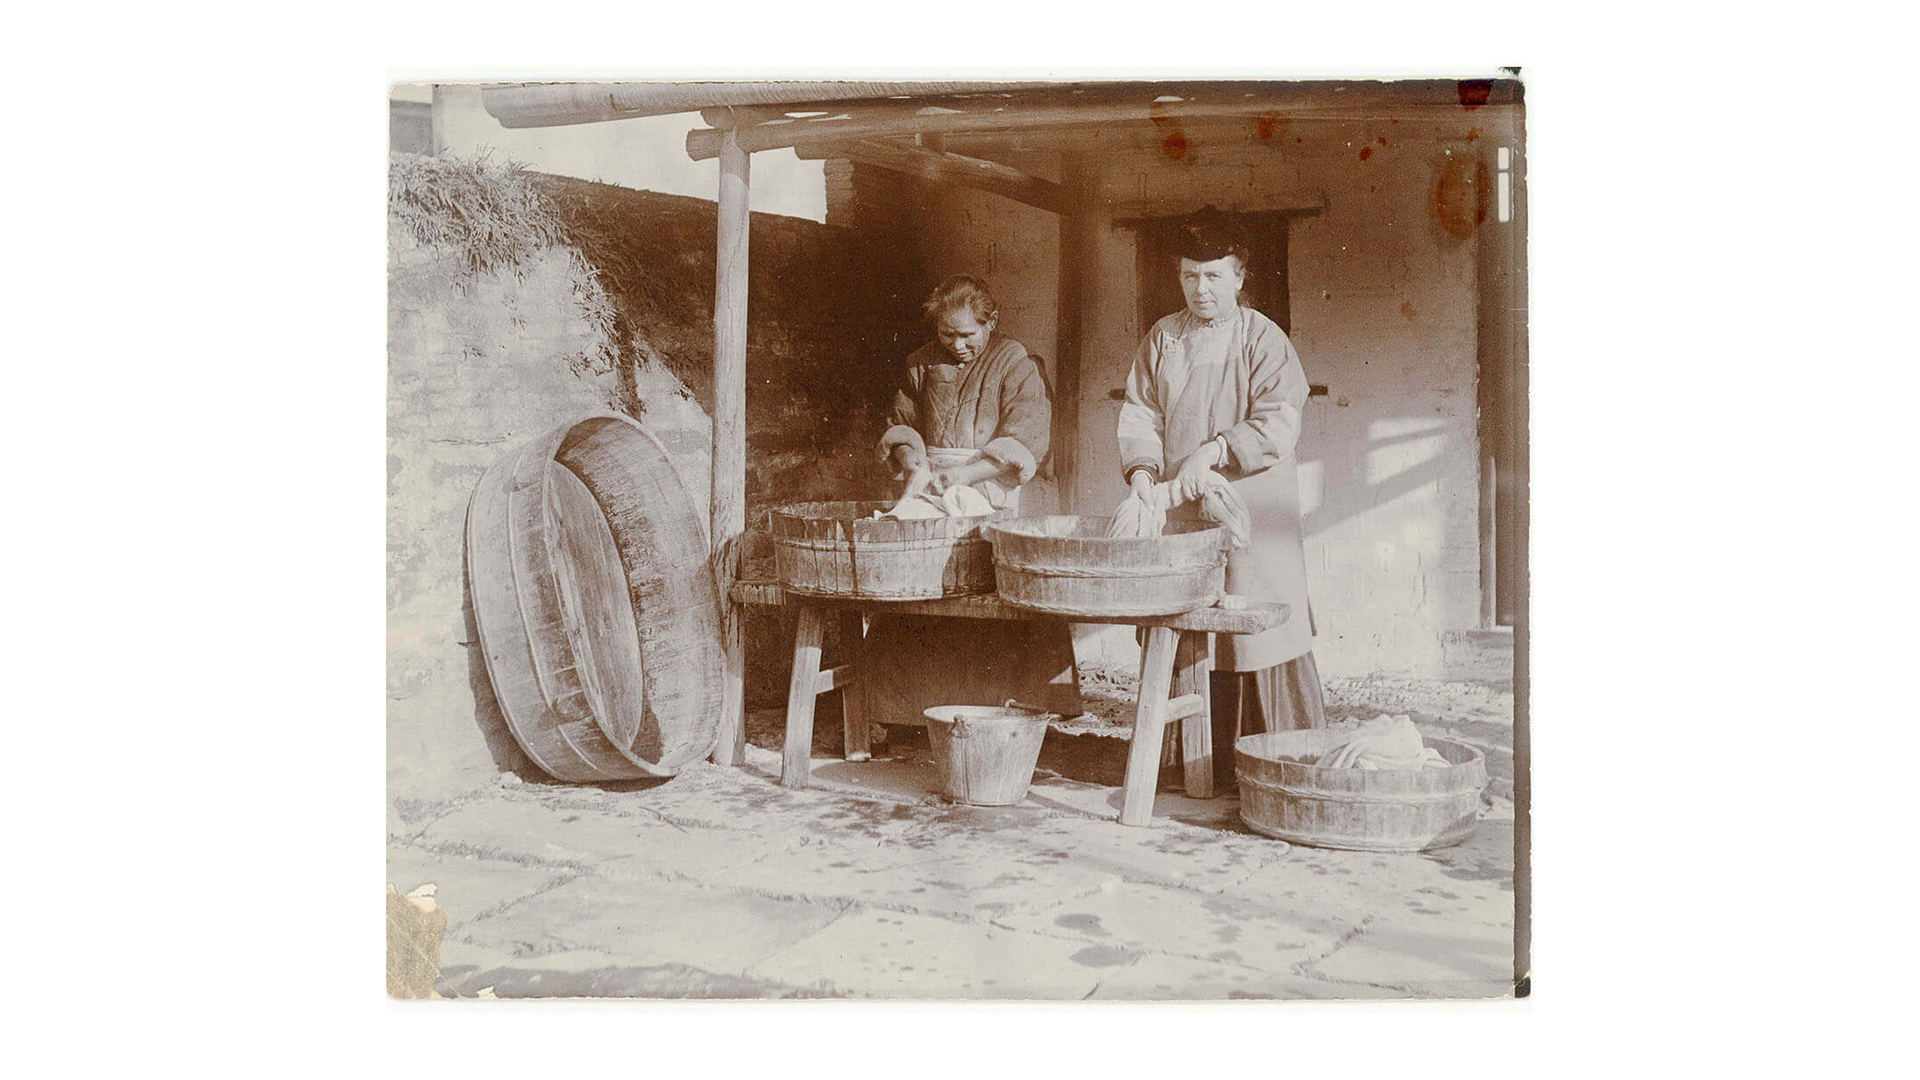 A missionary woman and a Chinese woman washing clothes.